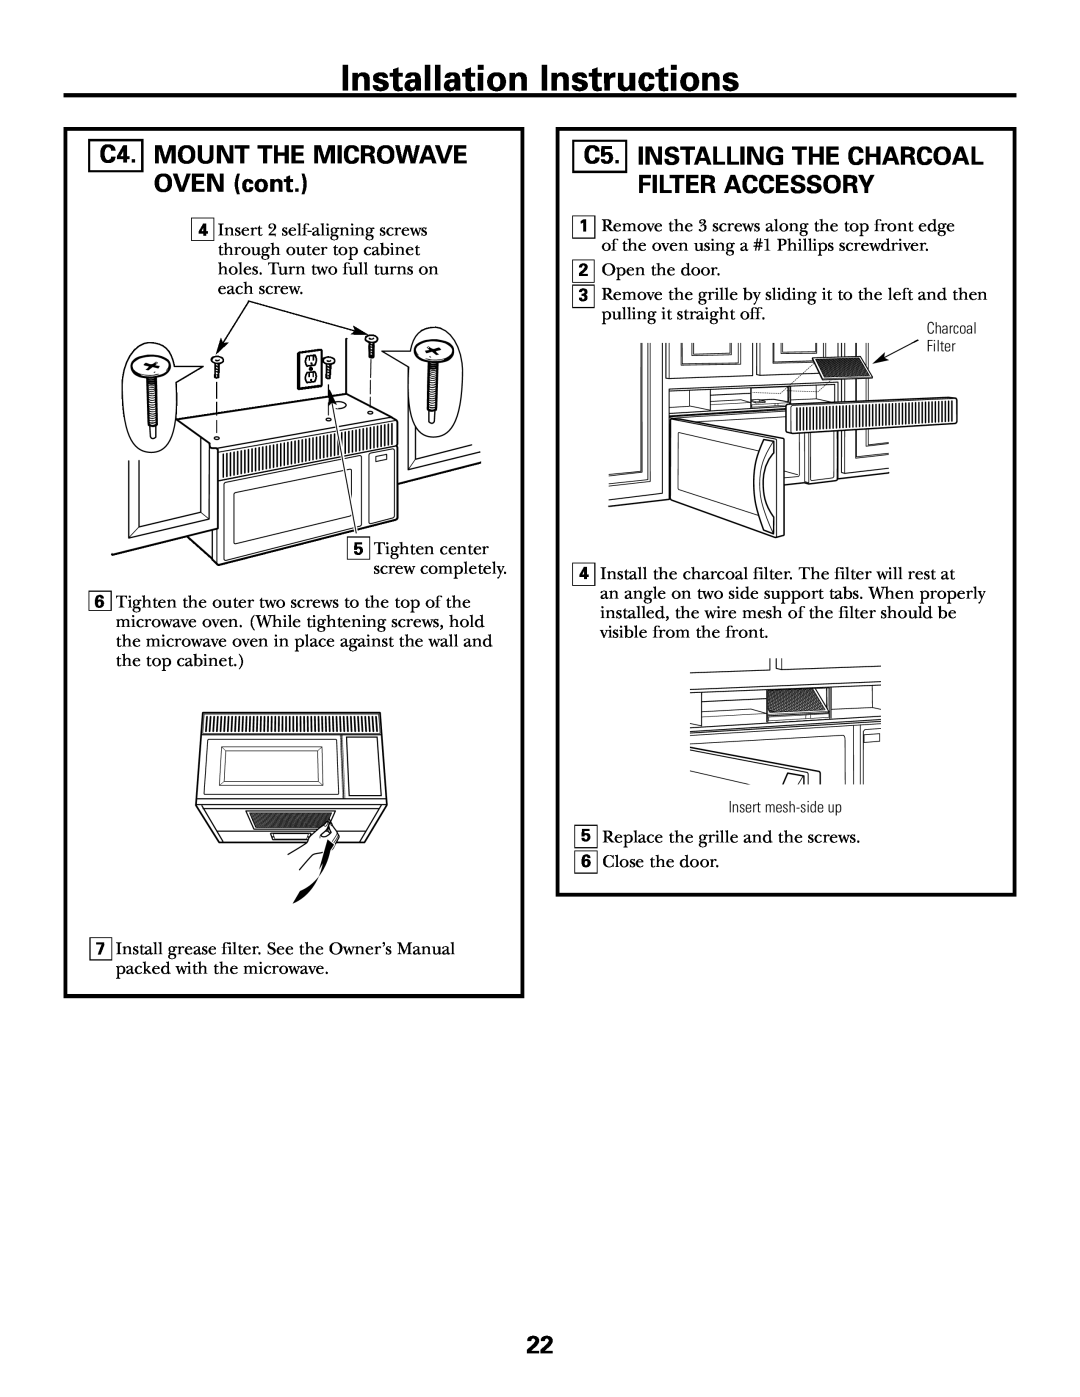 GE DE68-02957A C4. MOUNT THE MICROWAVE OVEN cont, C5. INSTALLING THE CHARCOAL FILTER ACCESSORY, Installation Instructions 